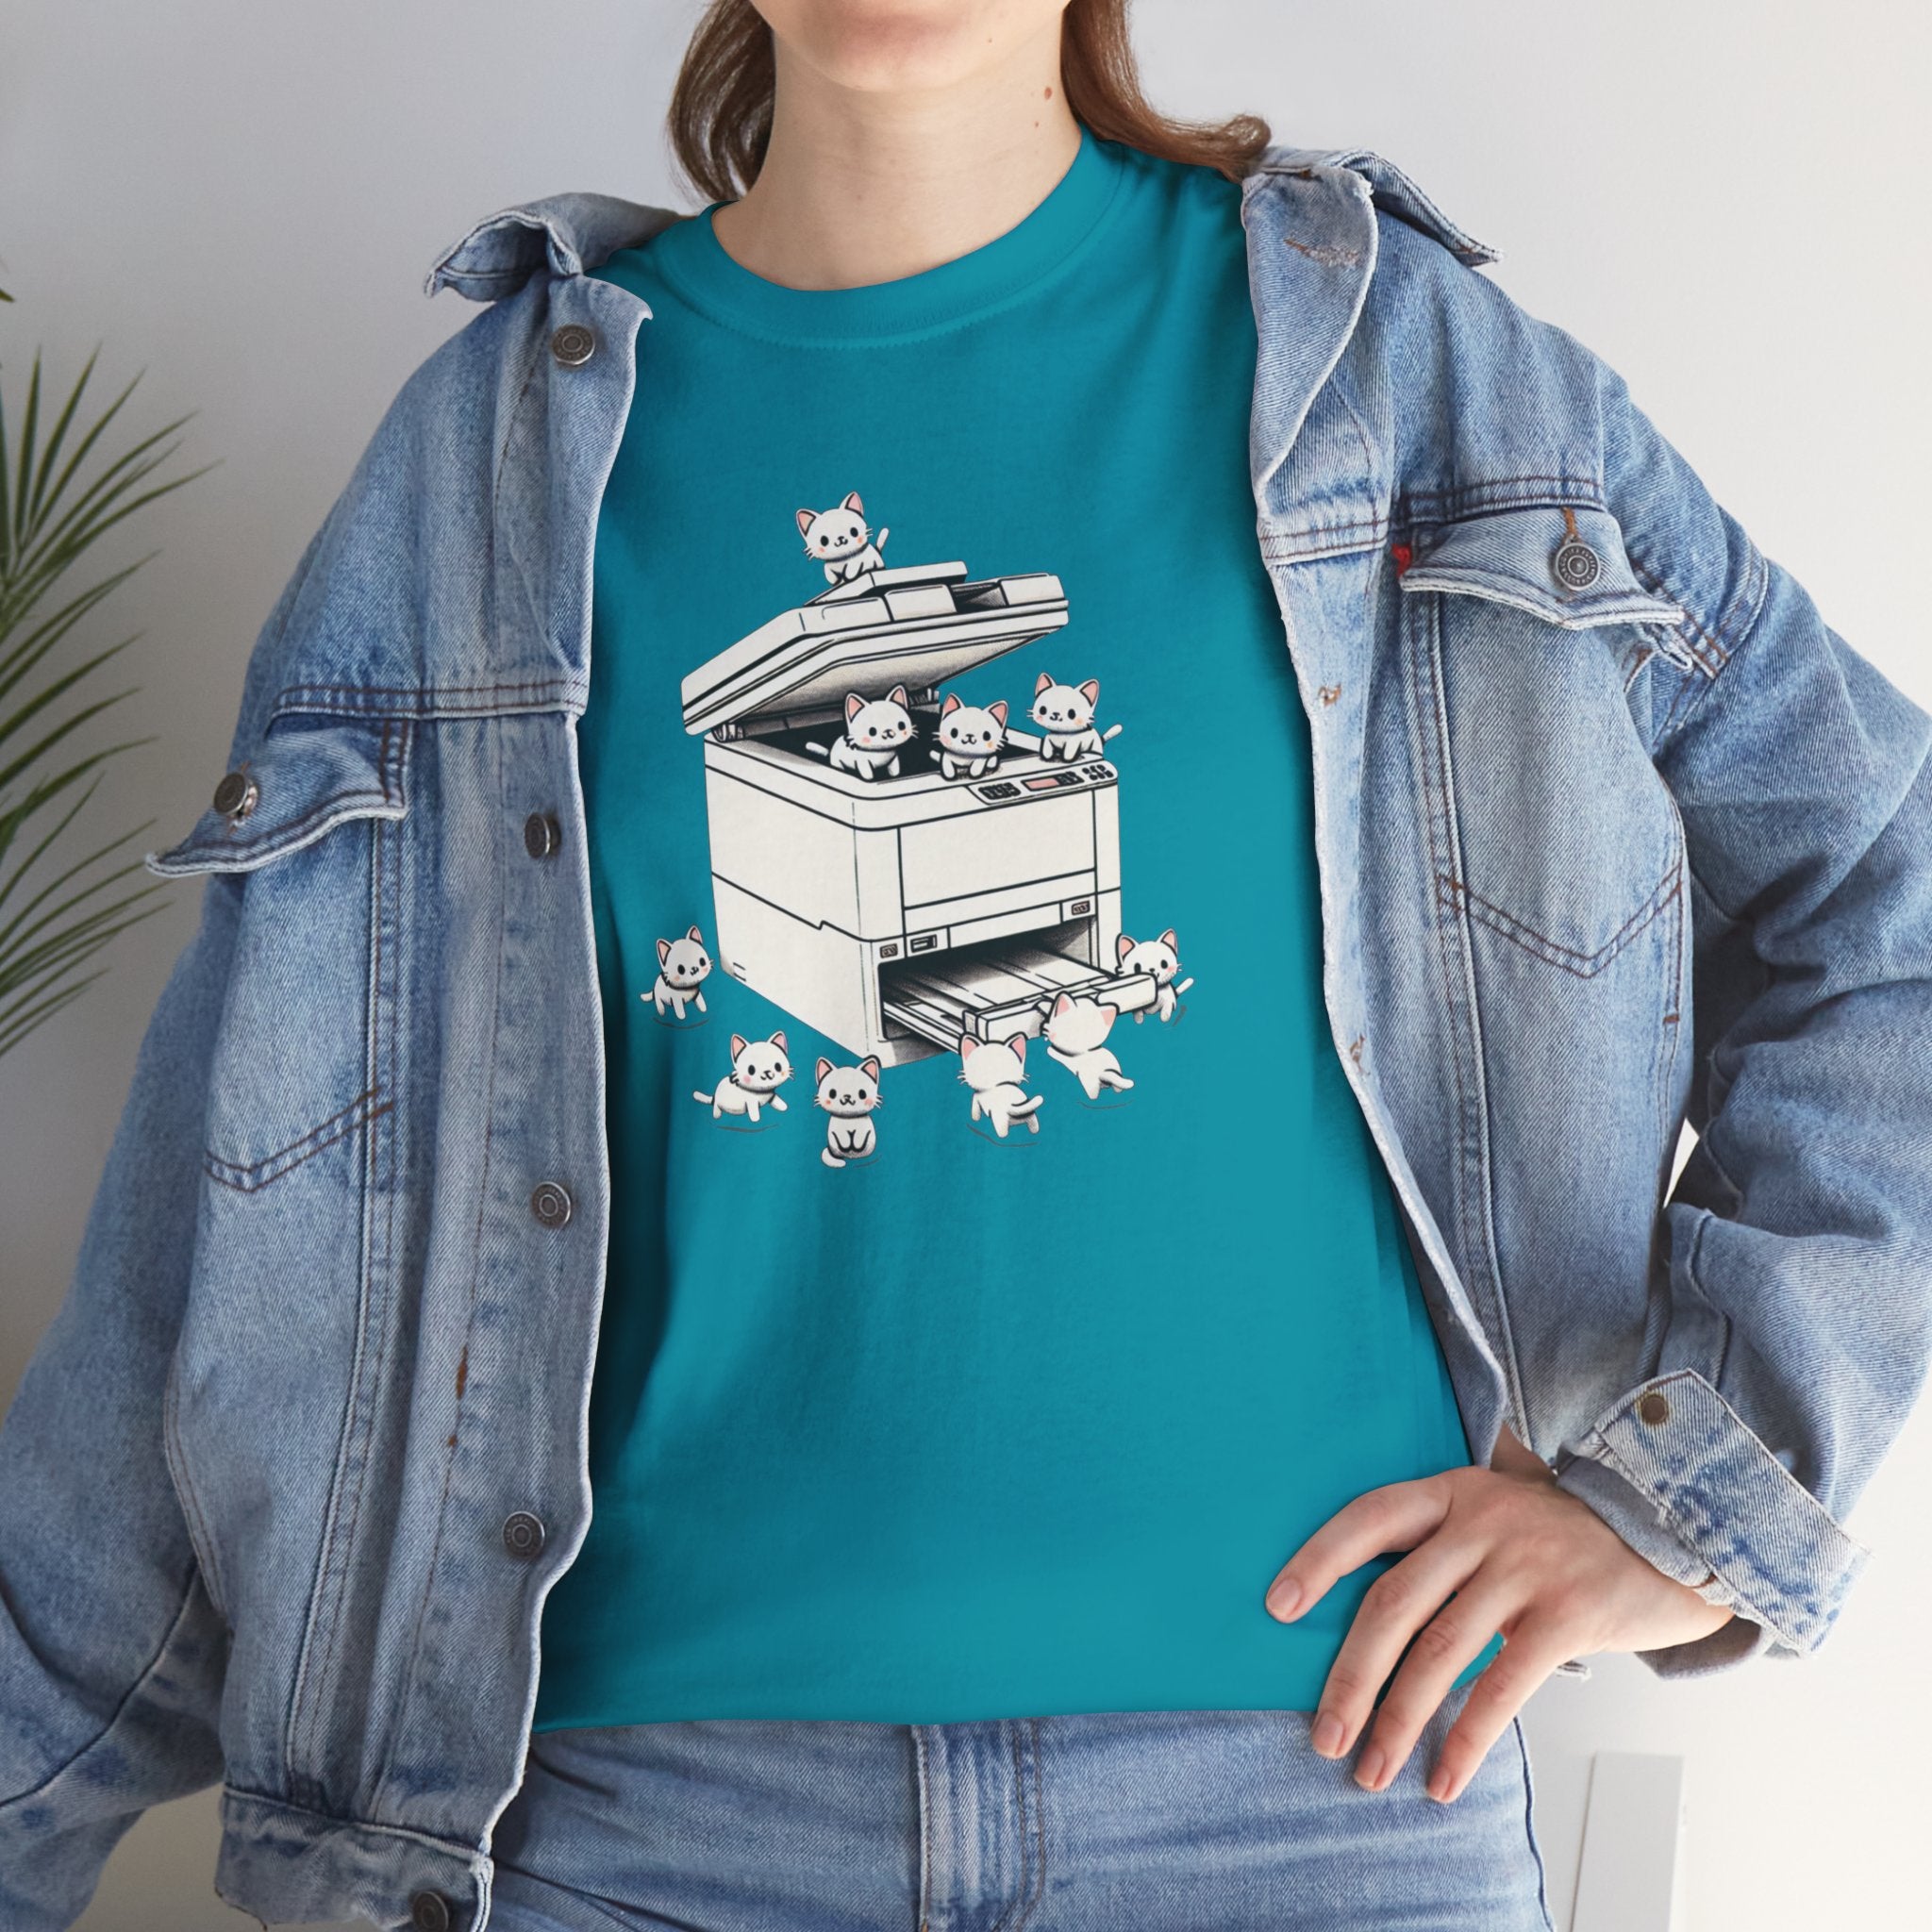 Copy Cats T-Shirt Unisex Heavy Cotton Tee Gift For Him Gift For Her Cute Shirt Couple Birthday Christmas TShirt Photocopier